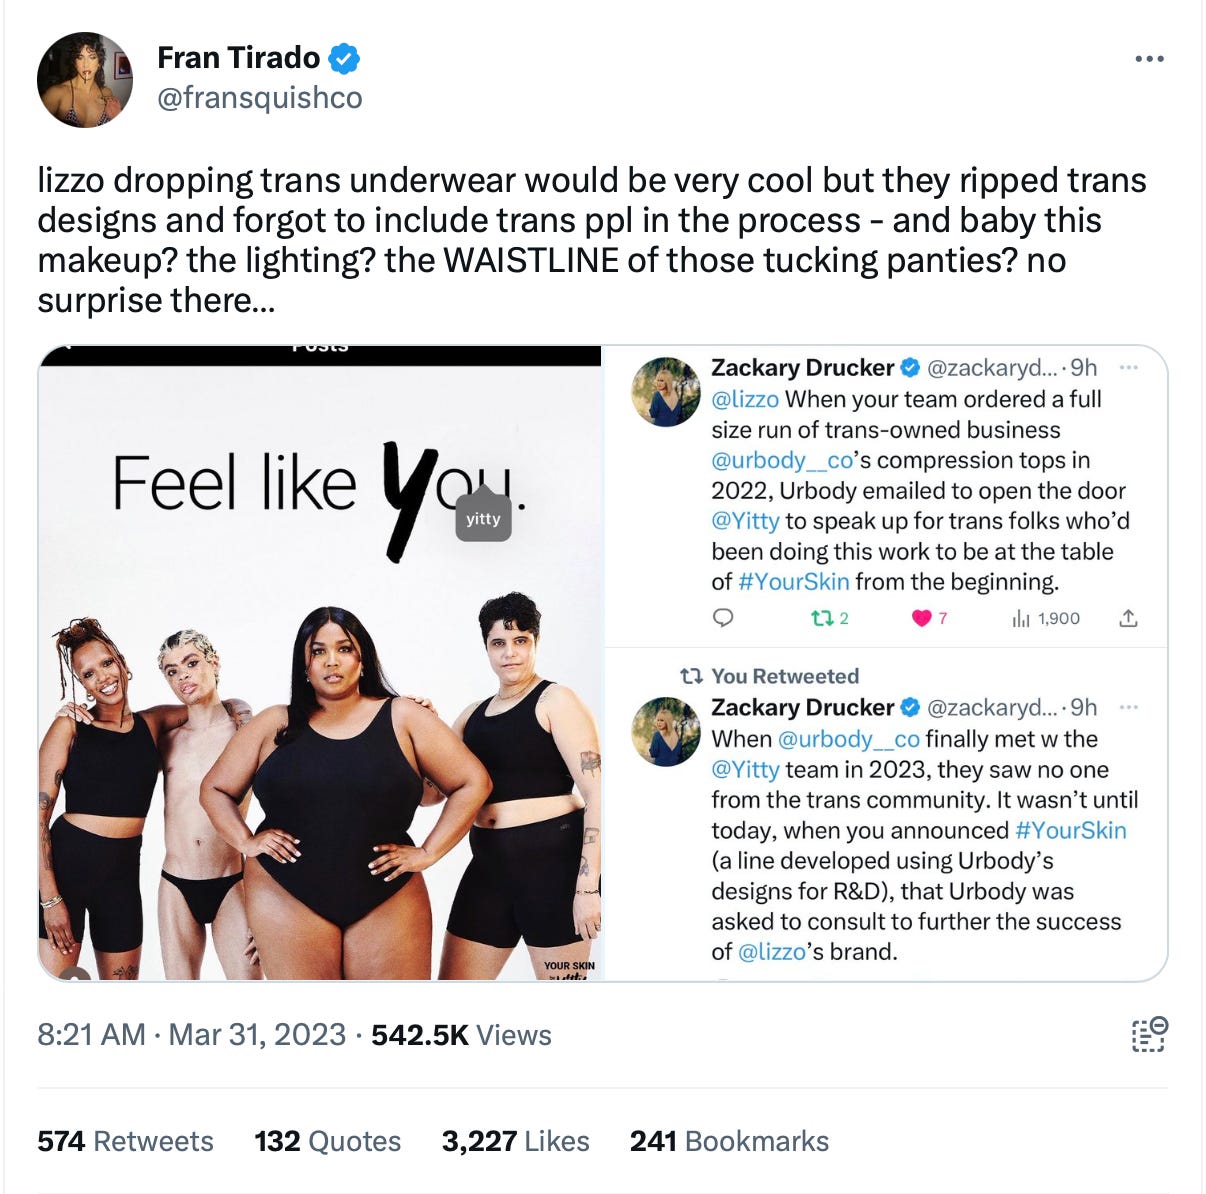 Lizzo's brand Yitty called out by trans-owned brand Urbody for